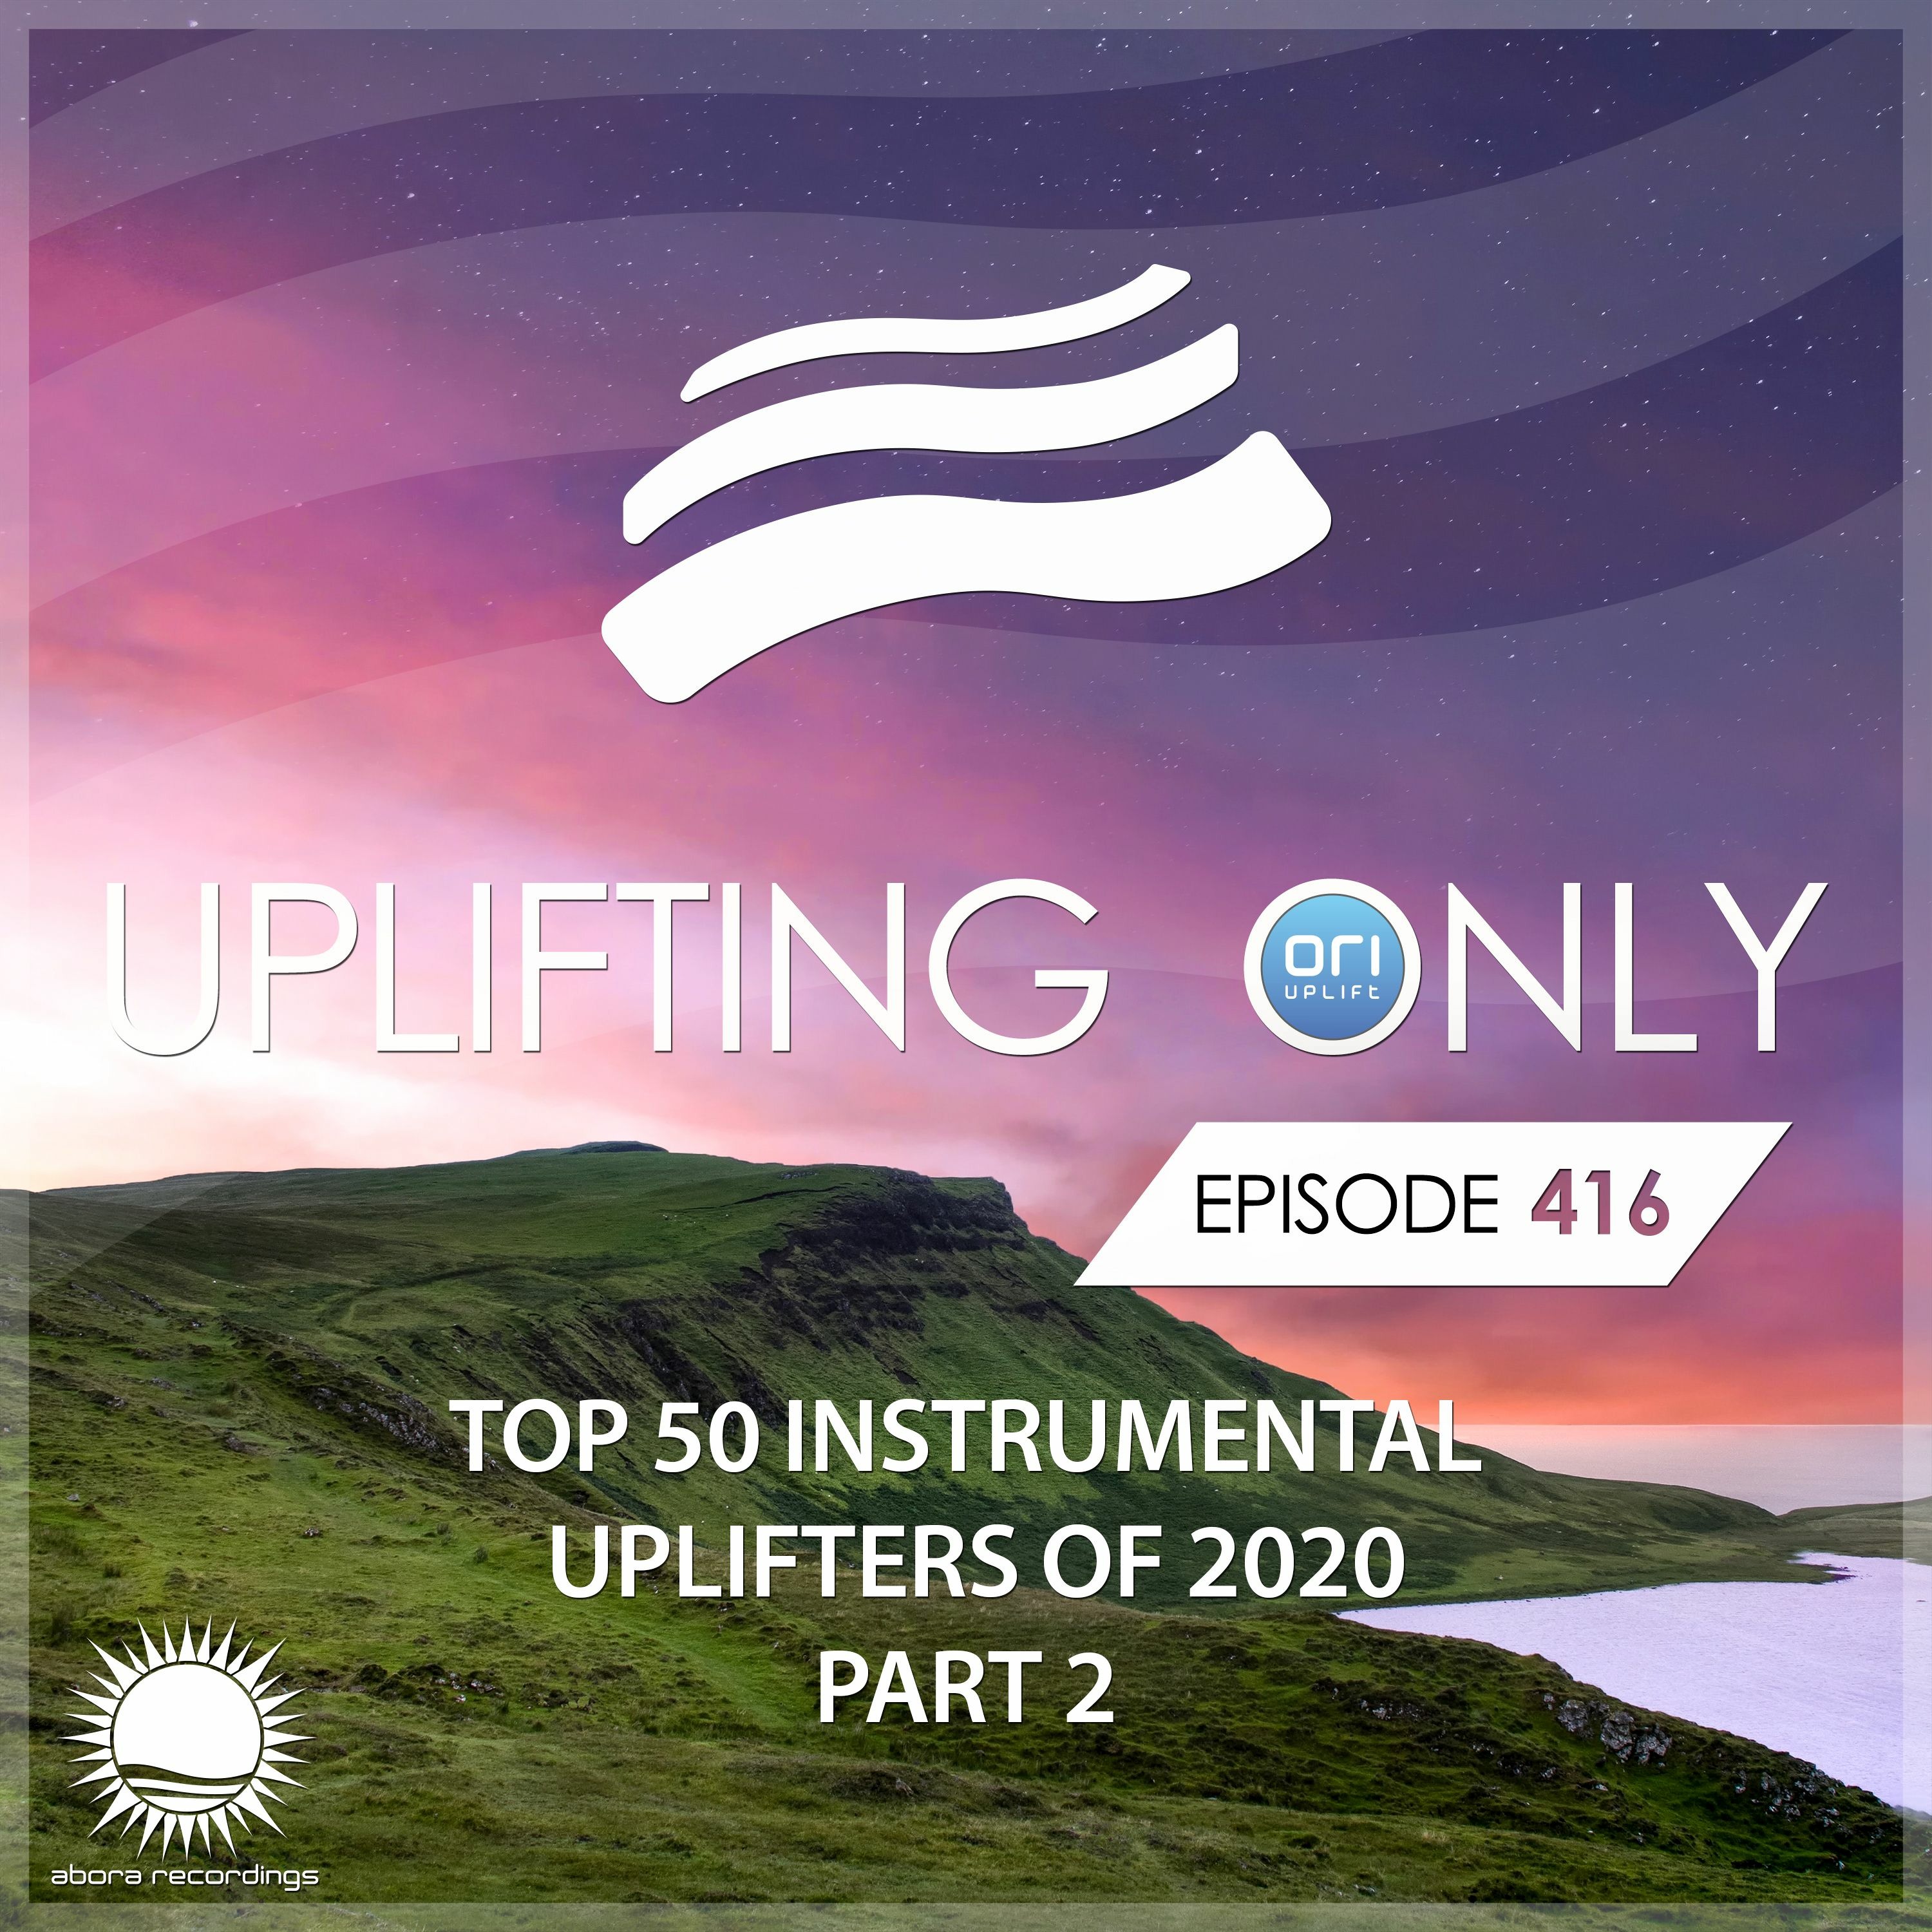 Uplifting Only 416 (Jan 28, 2021) (Ori’s Top 50 Instrumental Uplifters of 2020 - Part 2)